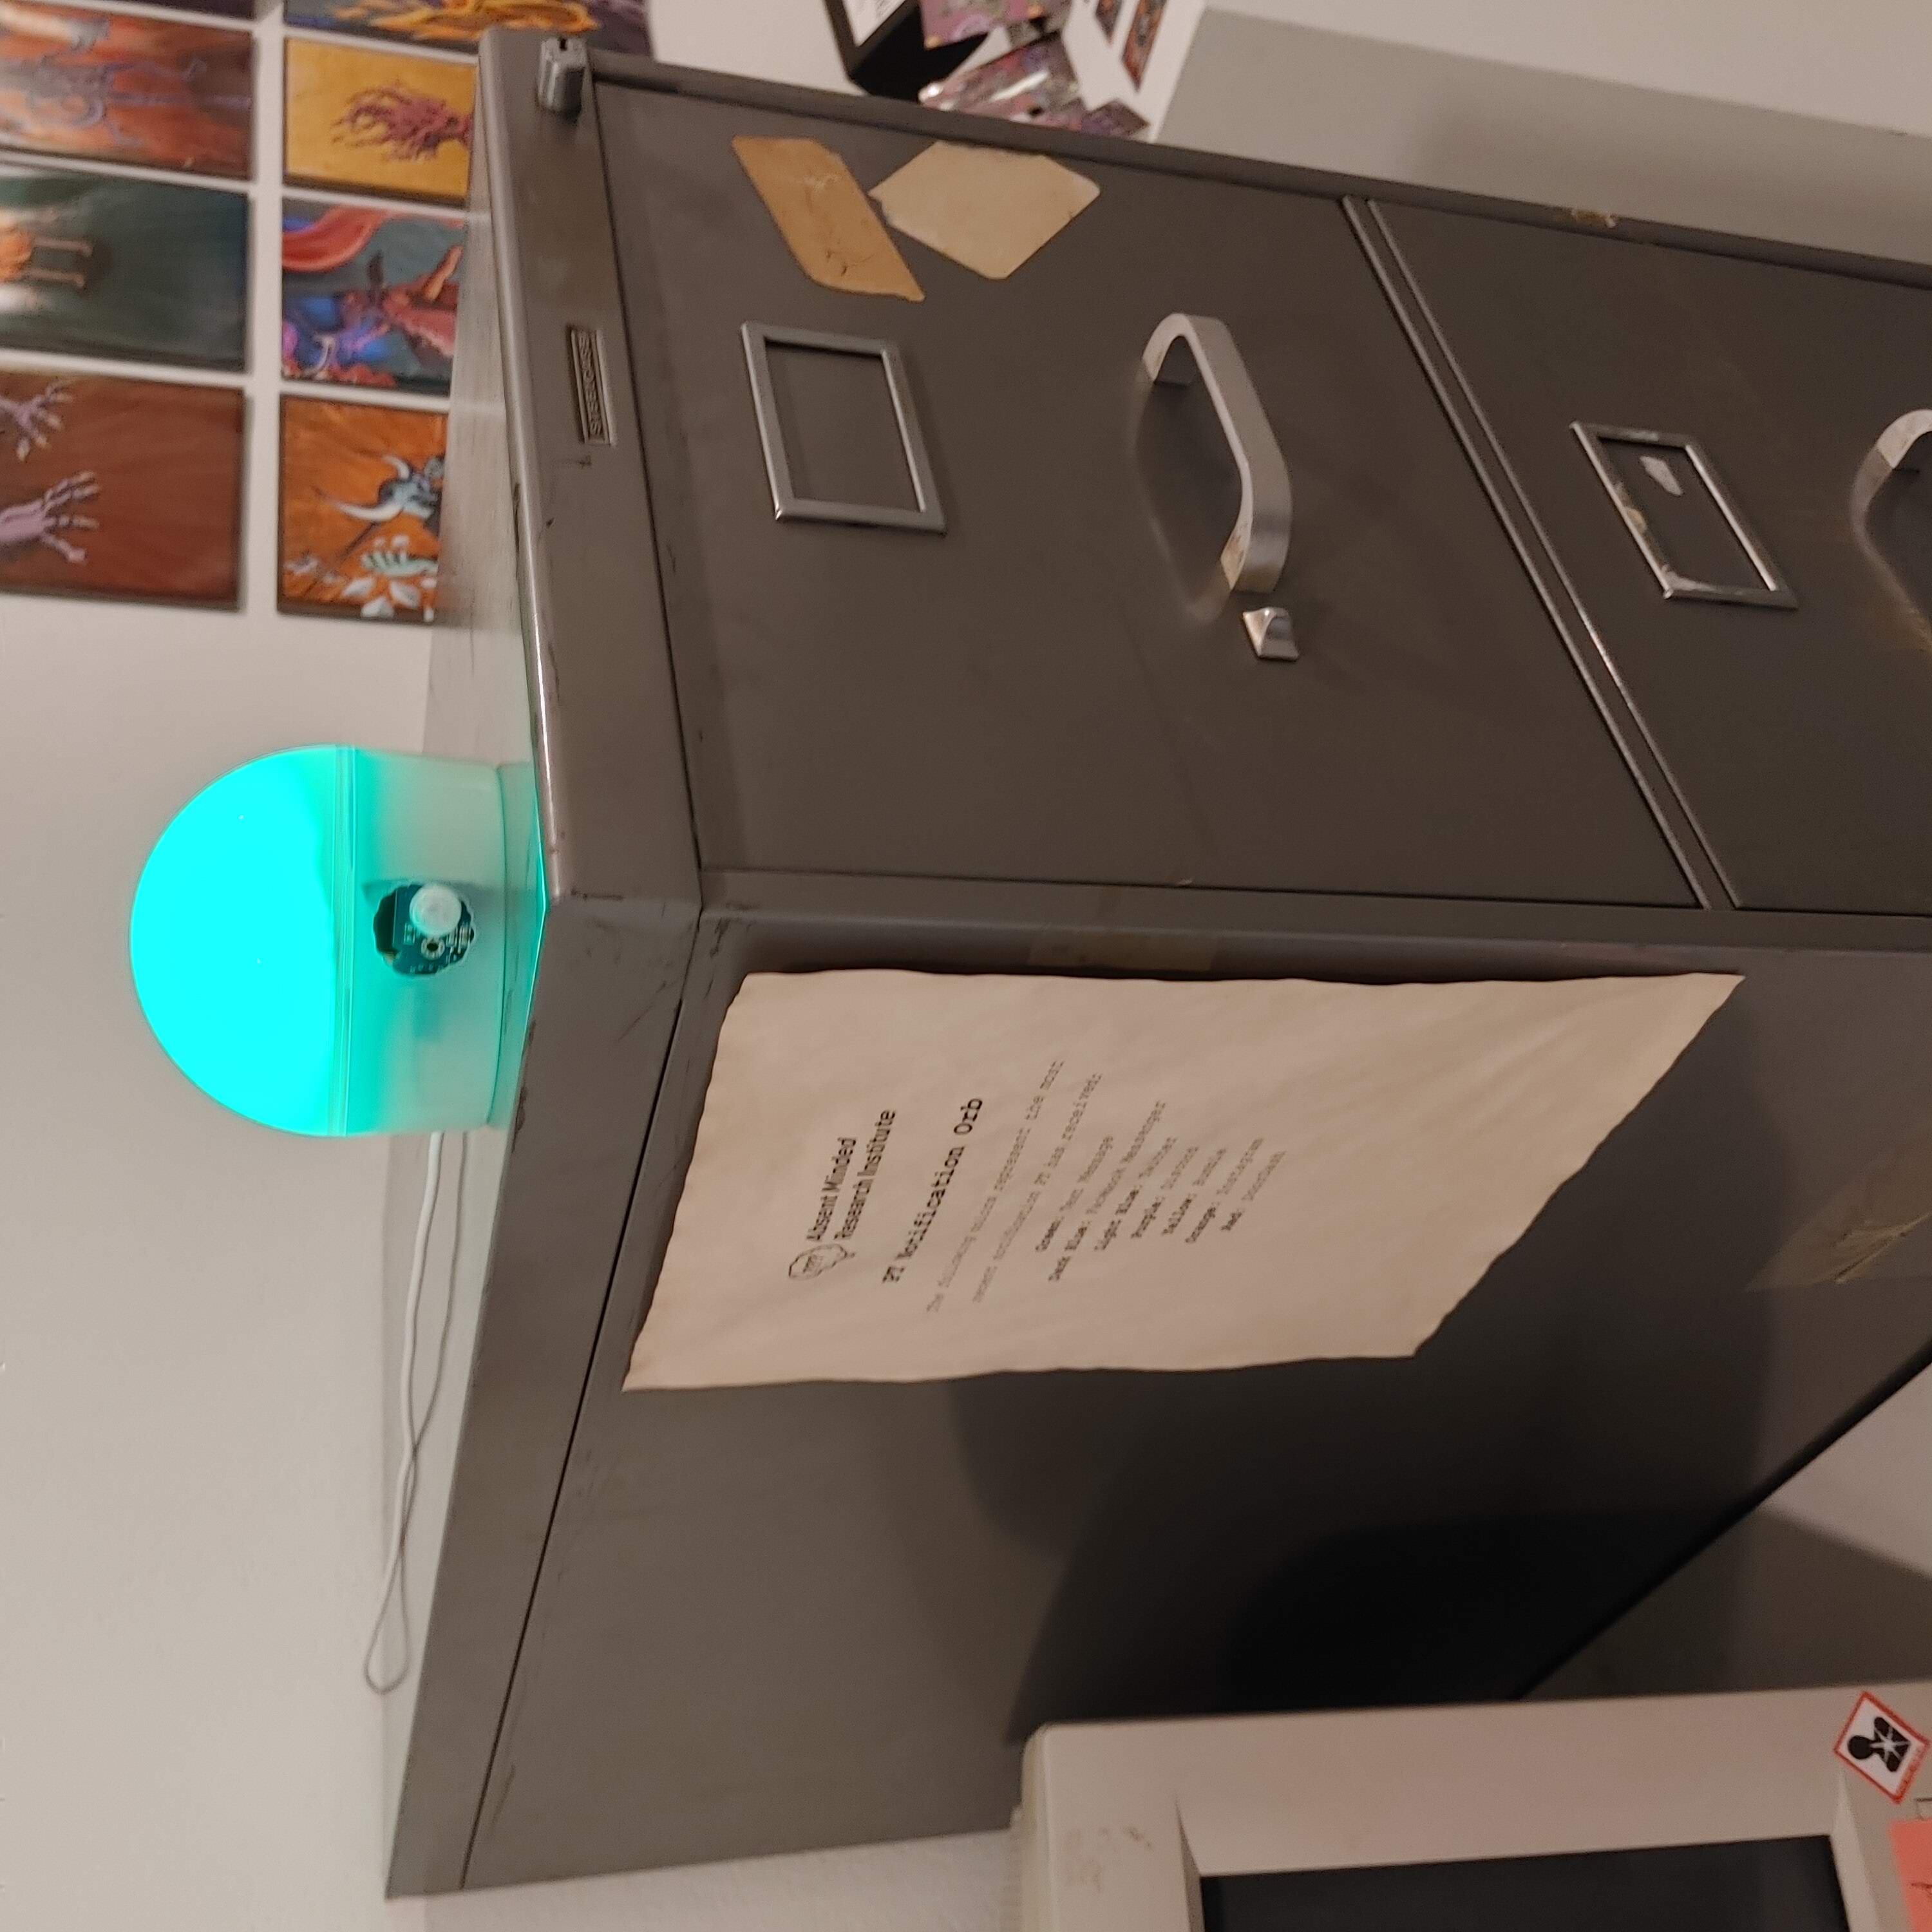 Photo of the notification orb sitting on top of a filing cabinet.